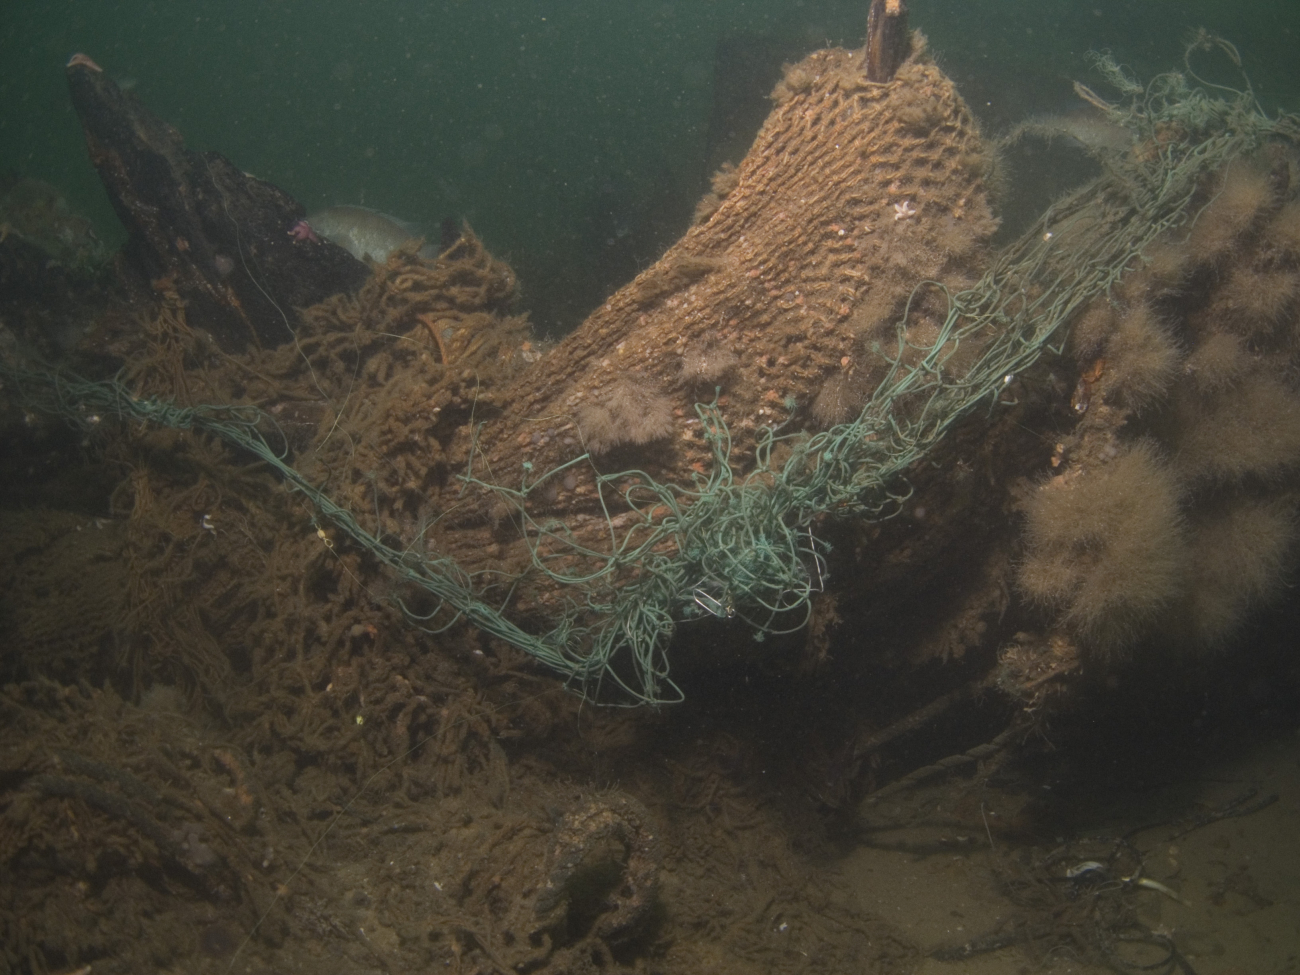 Fishing gear that has entangled historic shipwrecks harms the wreck'swooden structure as well as the marine life that reside there